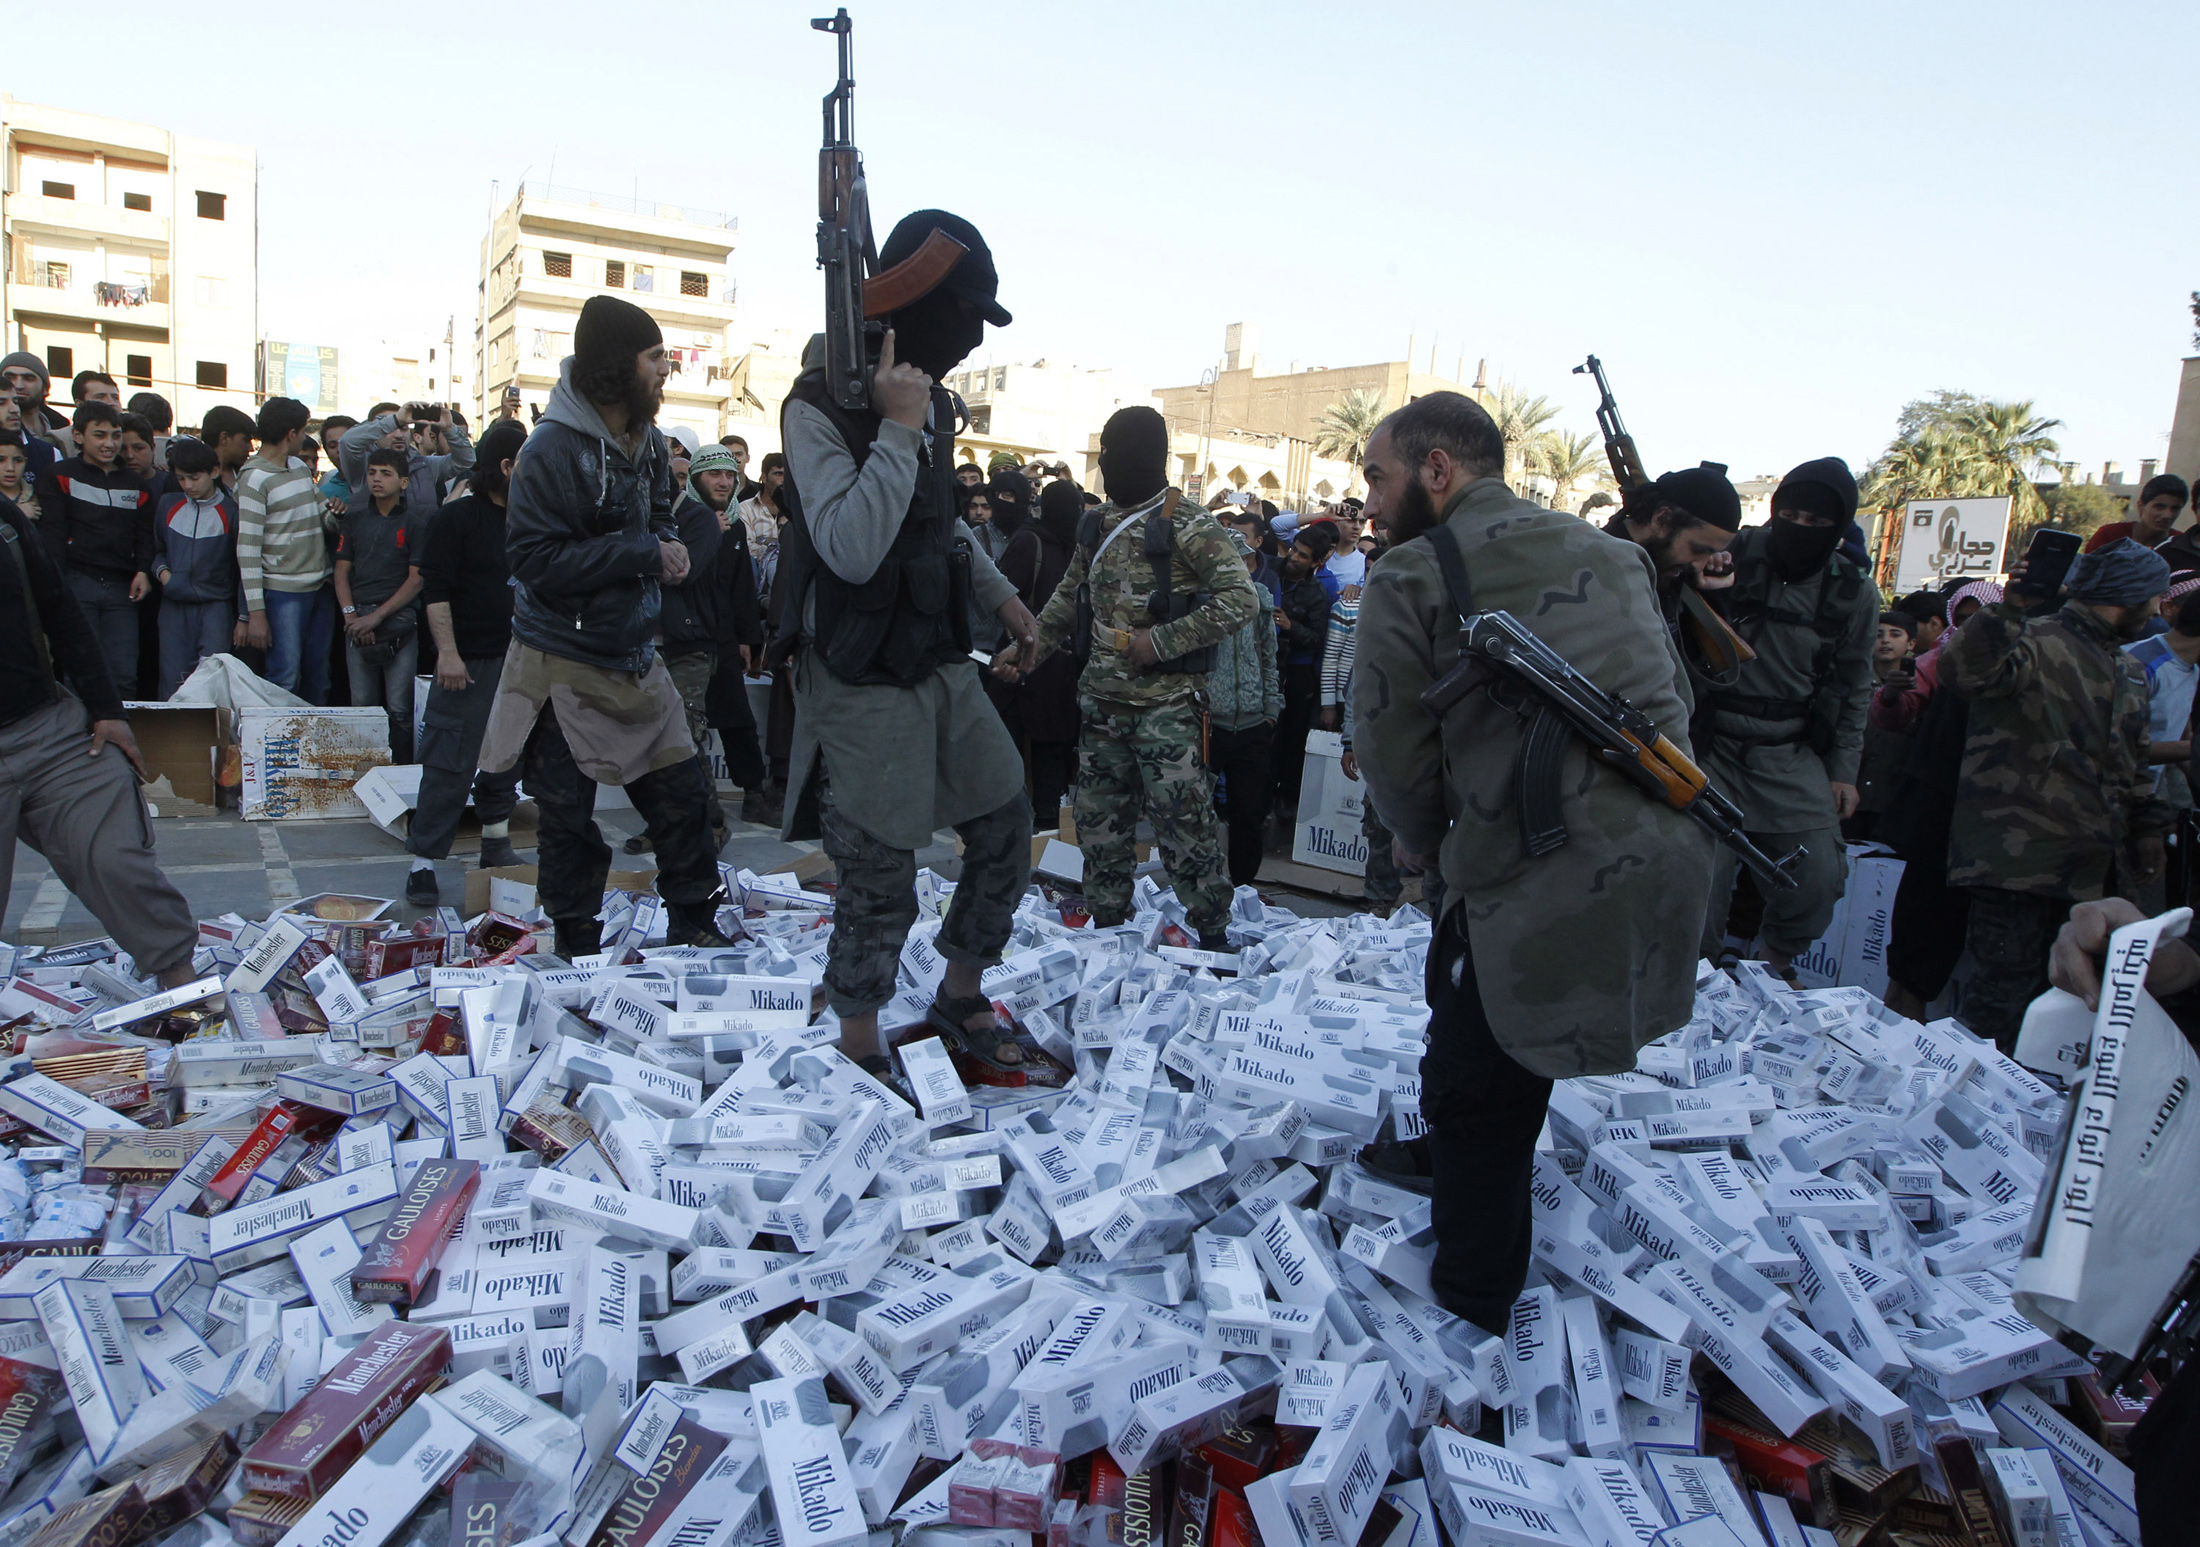 ISIS Fighters hold their weapons as they stand on confiscated cigarettes before setting them on fire، Raqqa, Syria, 2 April 2014. Reuters, Stringer.